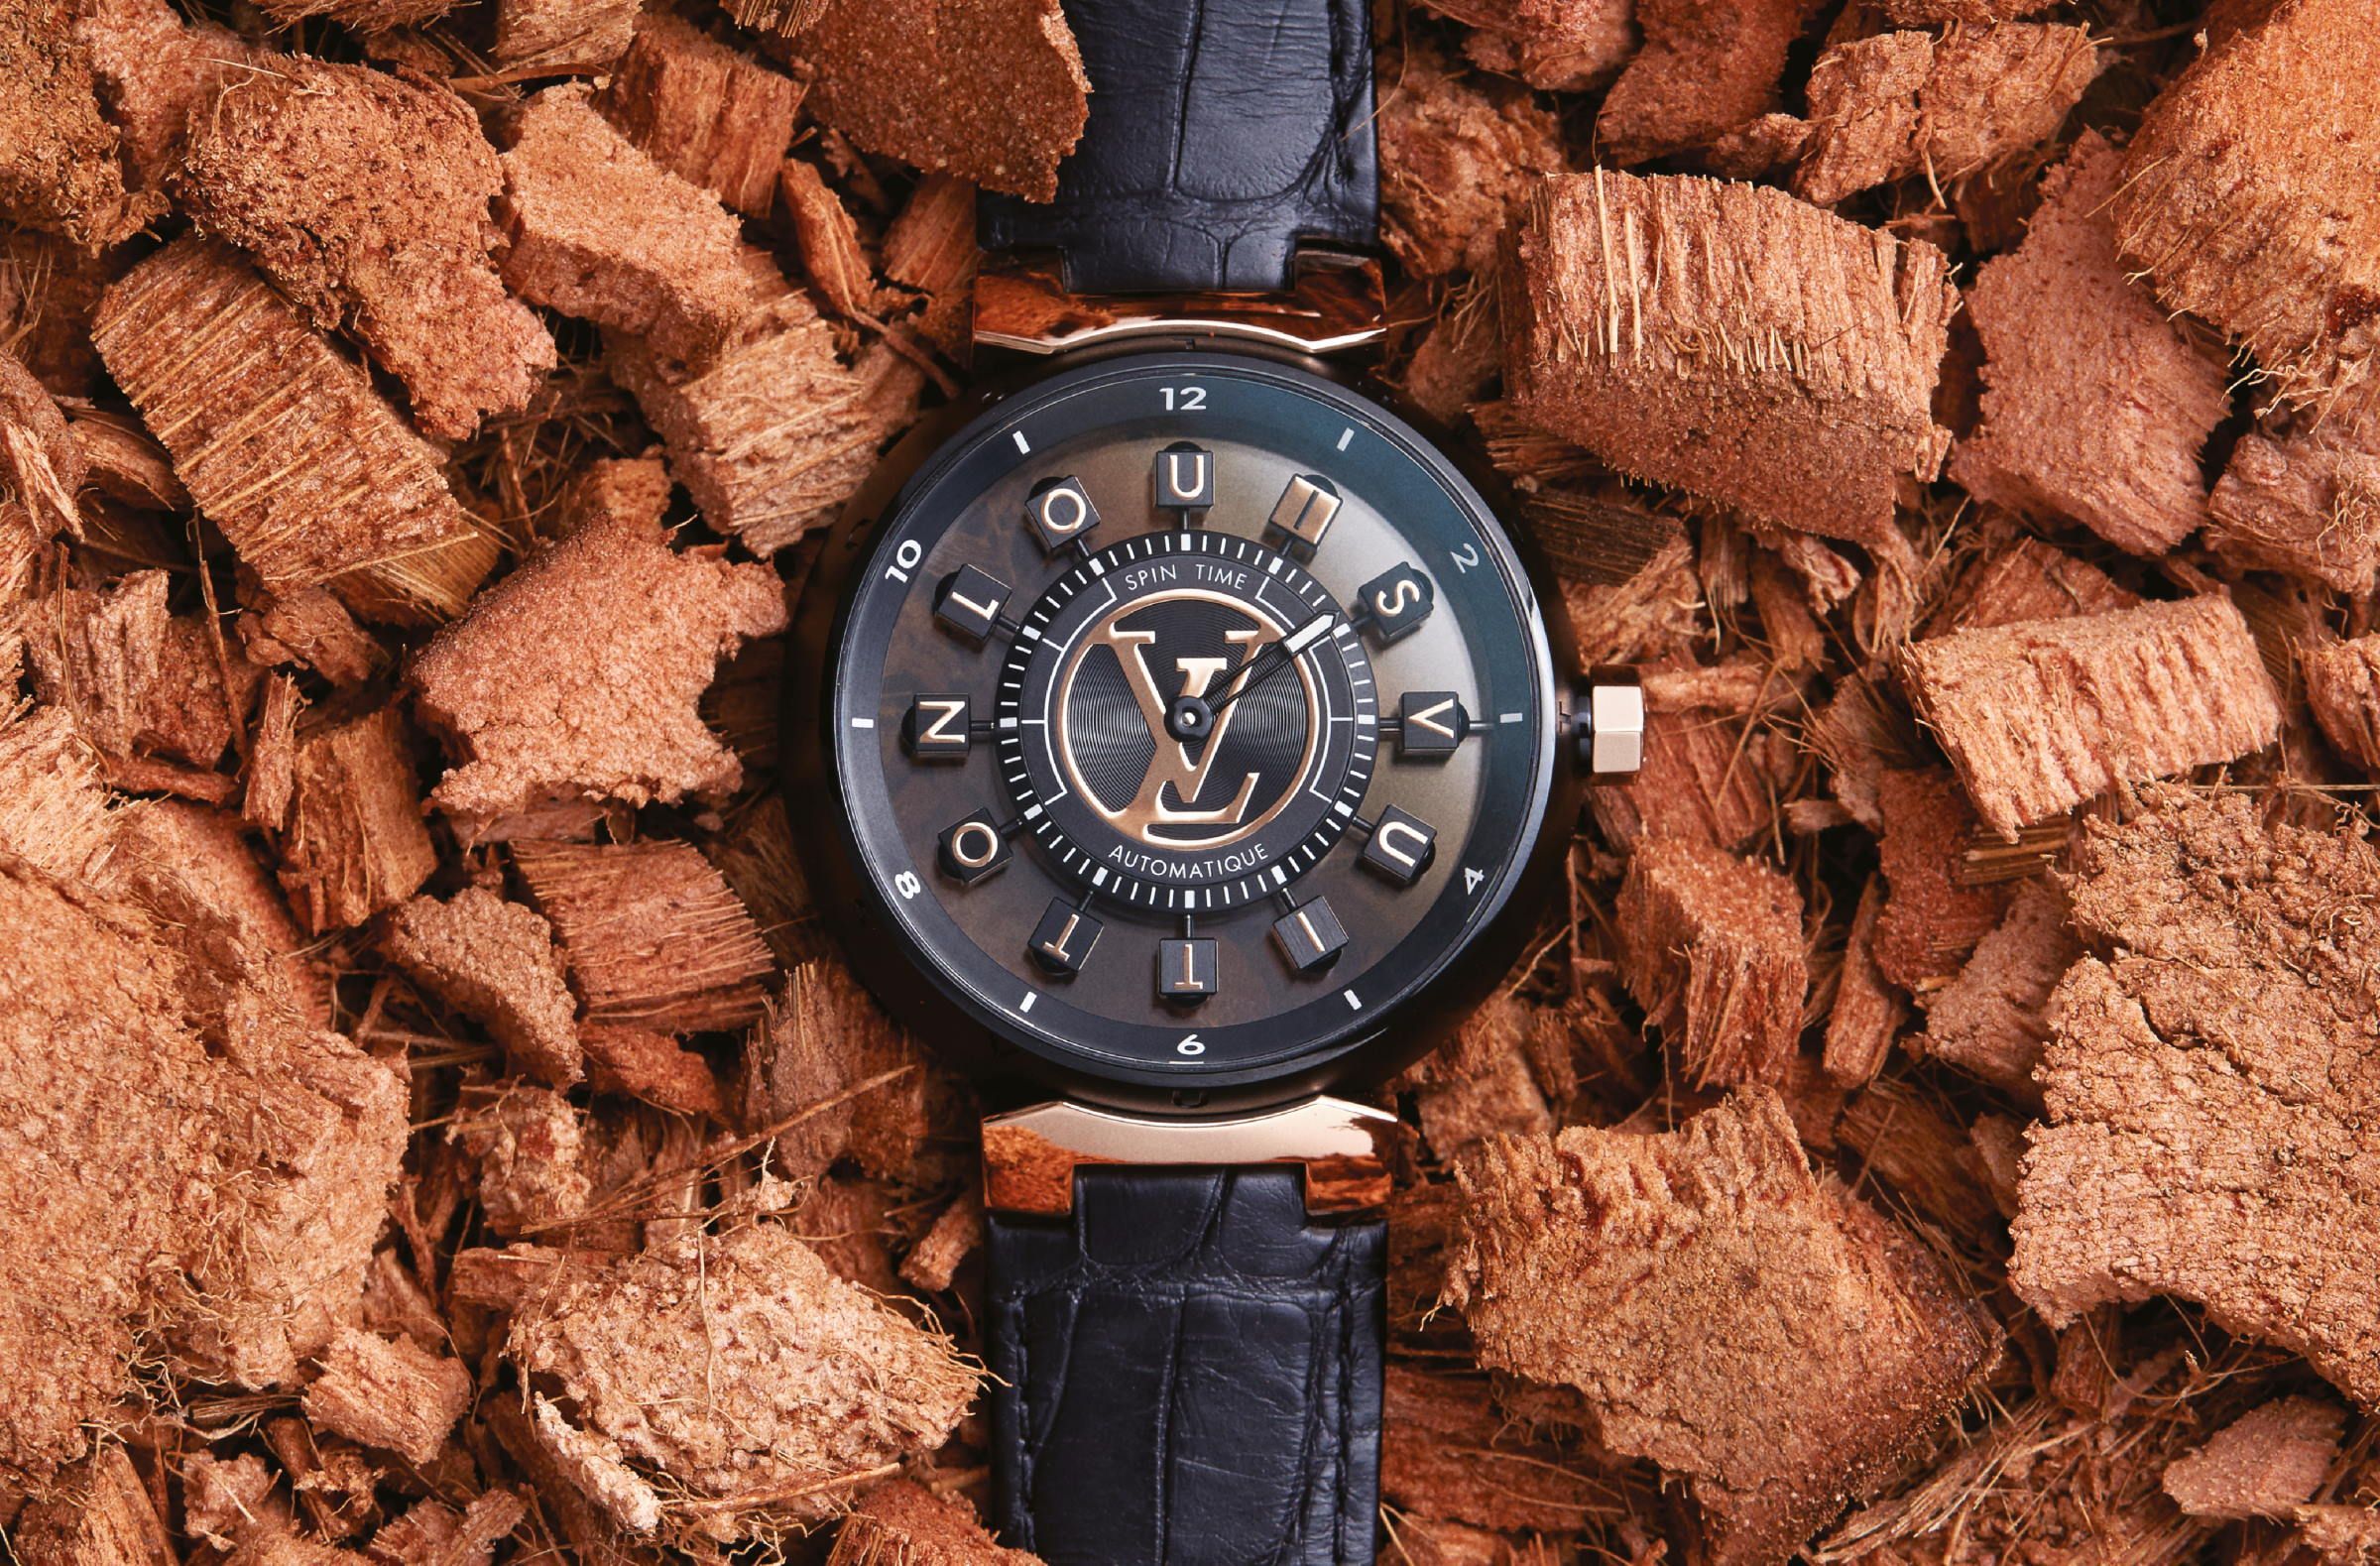 Blossom Spin Time watch, Louis Vuitton